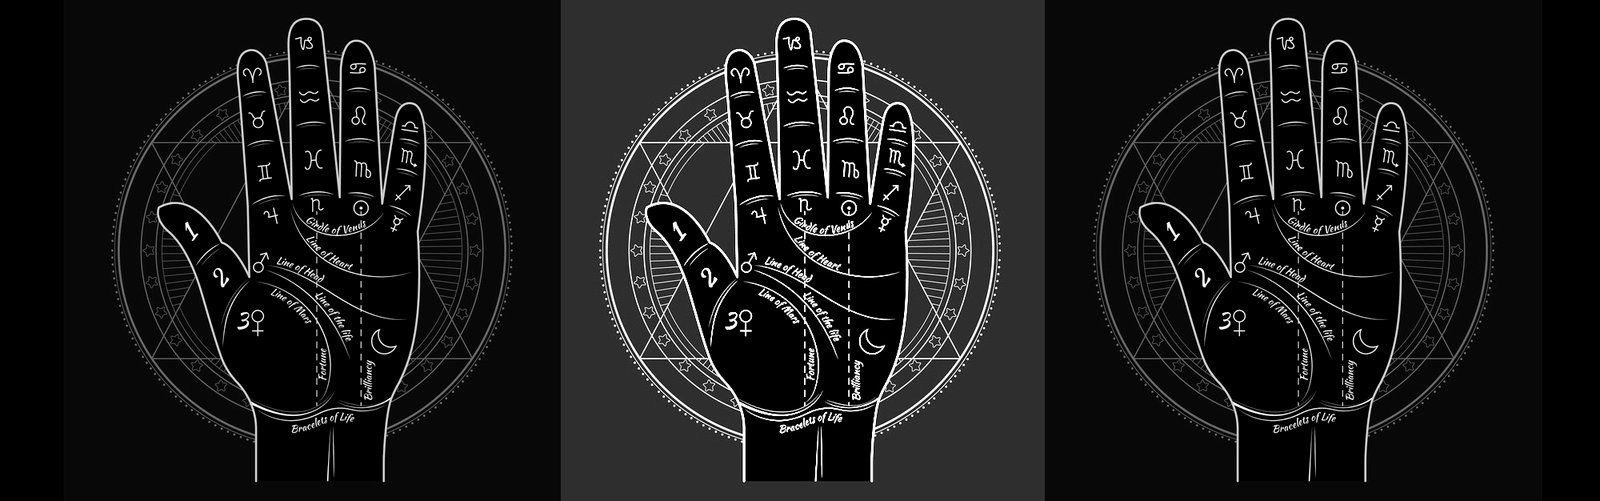 Rare Hands: Palmistry & The Simian Line